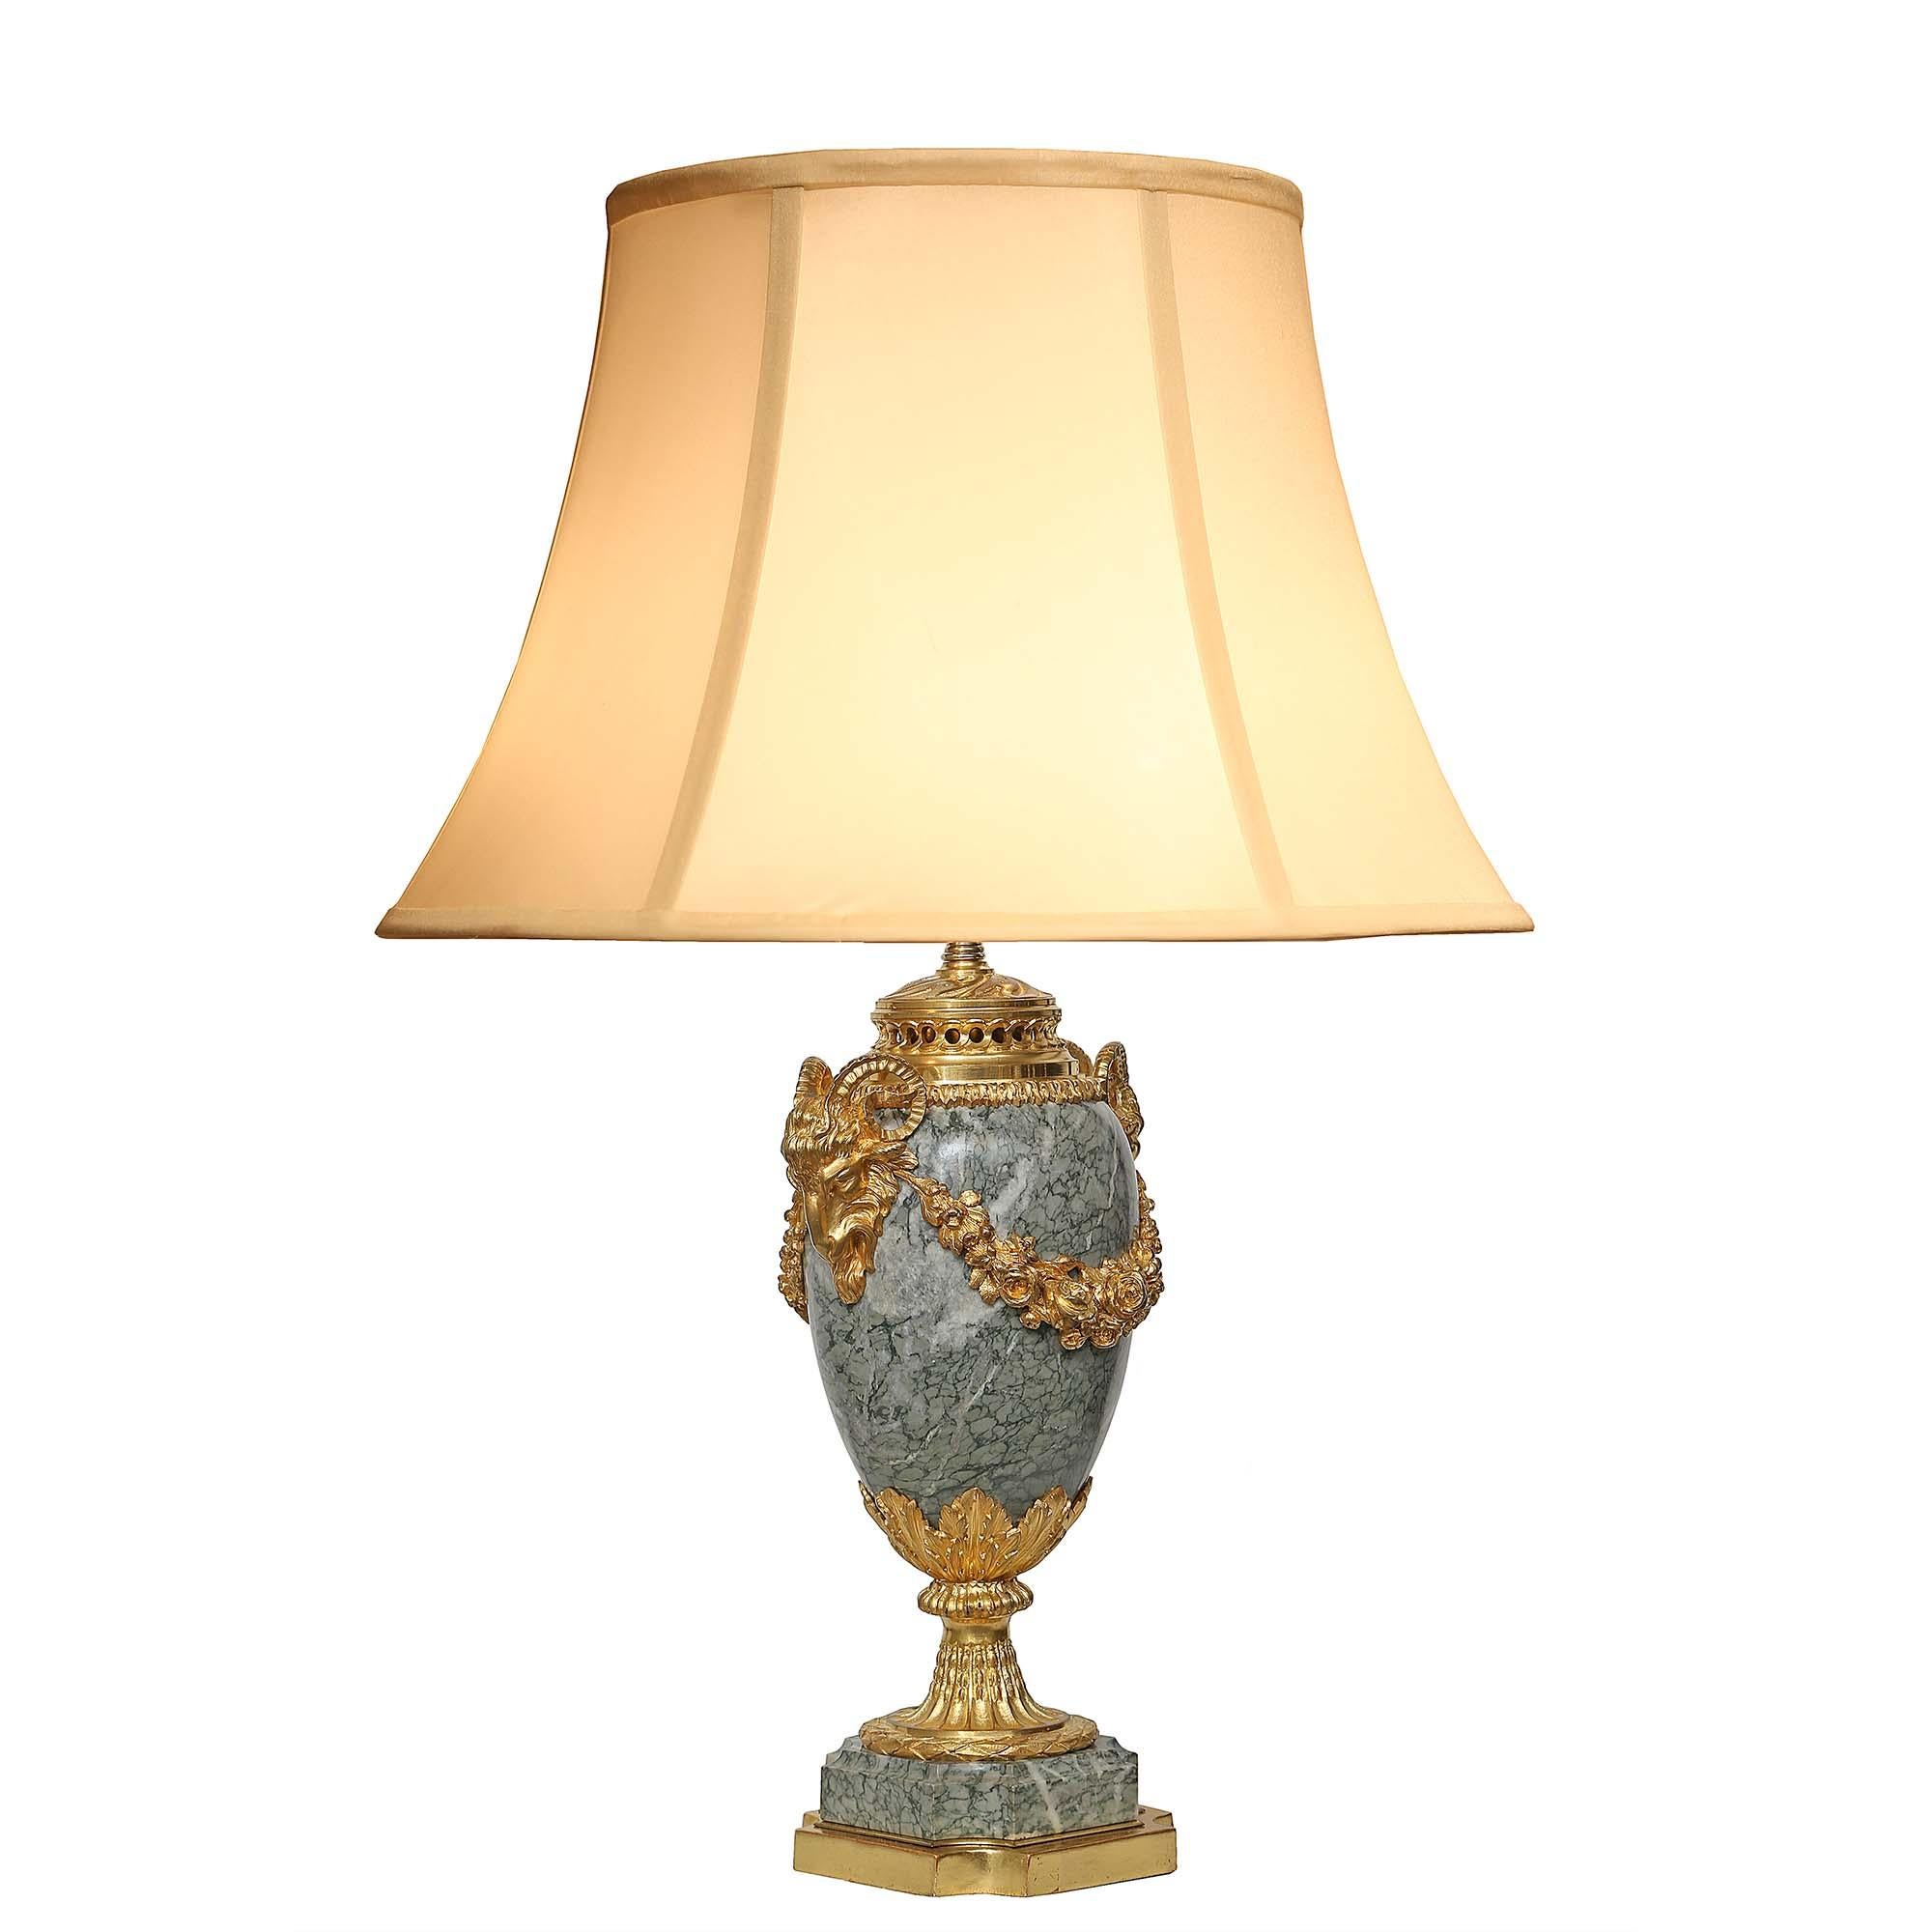 An elegant pair of French 19th century Louis XVI st. ormolu and marble urns mounted into lamps. Each lamp is raised on a square gilt wood and marble base with concave corners. The richly chased satin and burnished finished socle pedestal with a